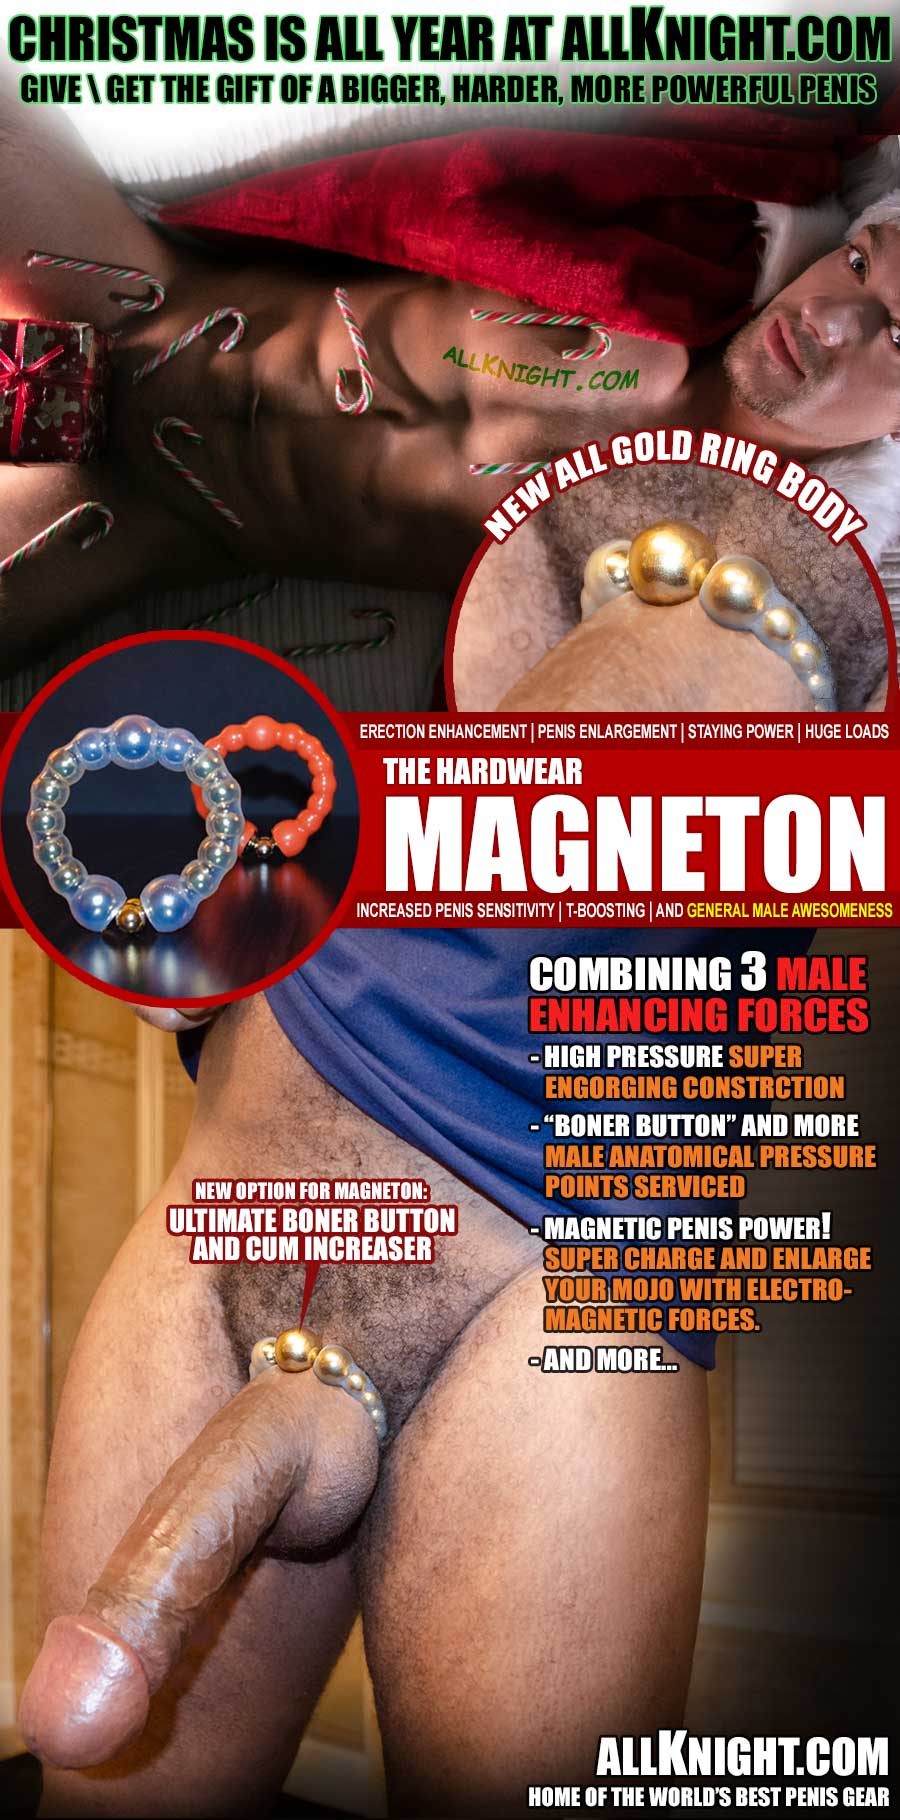 Want to get your Magneton H80 in gold? Want a super long dick like this&mdash;a super cock? The HARDWEAR brand has been making male enhancement easy for men for decades. So, if you&rsquo;re ready to unleash your inner superman and your inner porn star and all of that, the time is now.